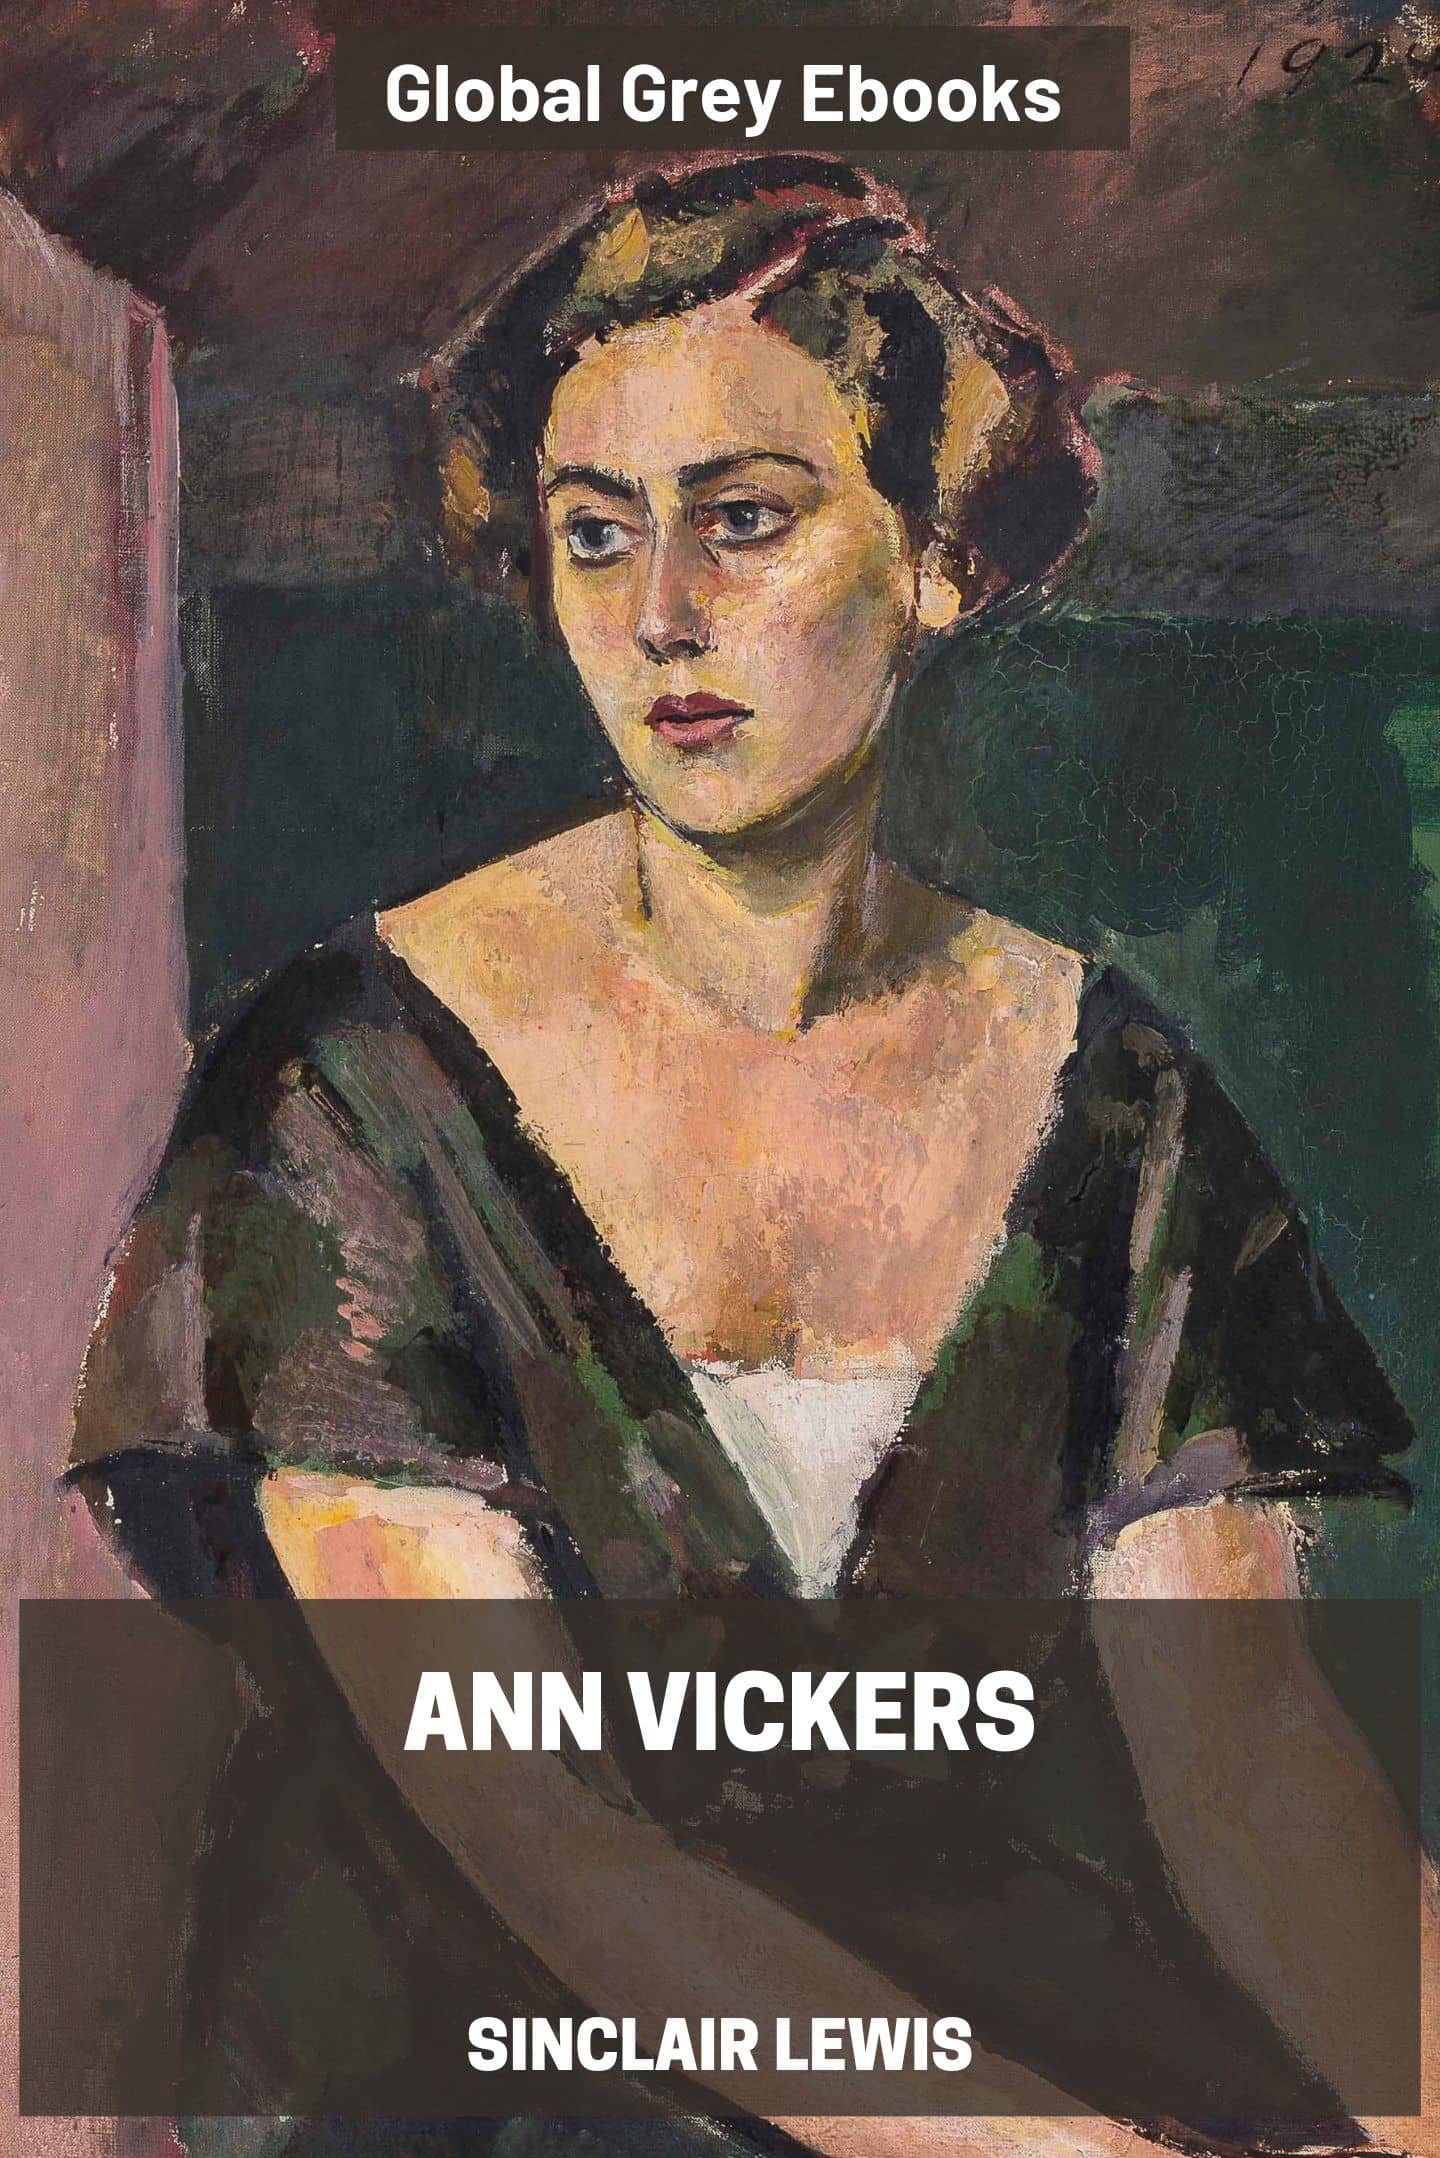 Ann Vickers by Sinclair Lewis - Complete text online